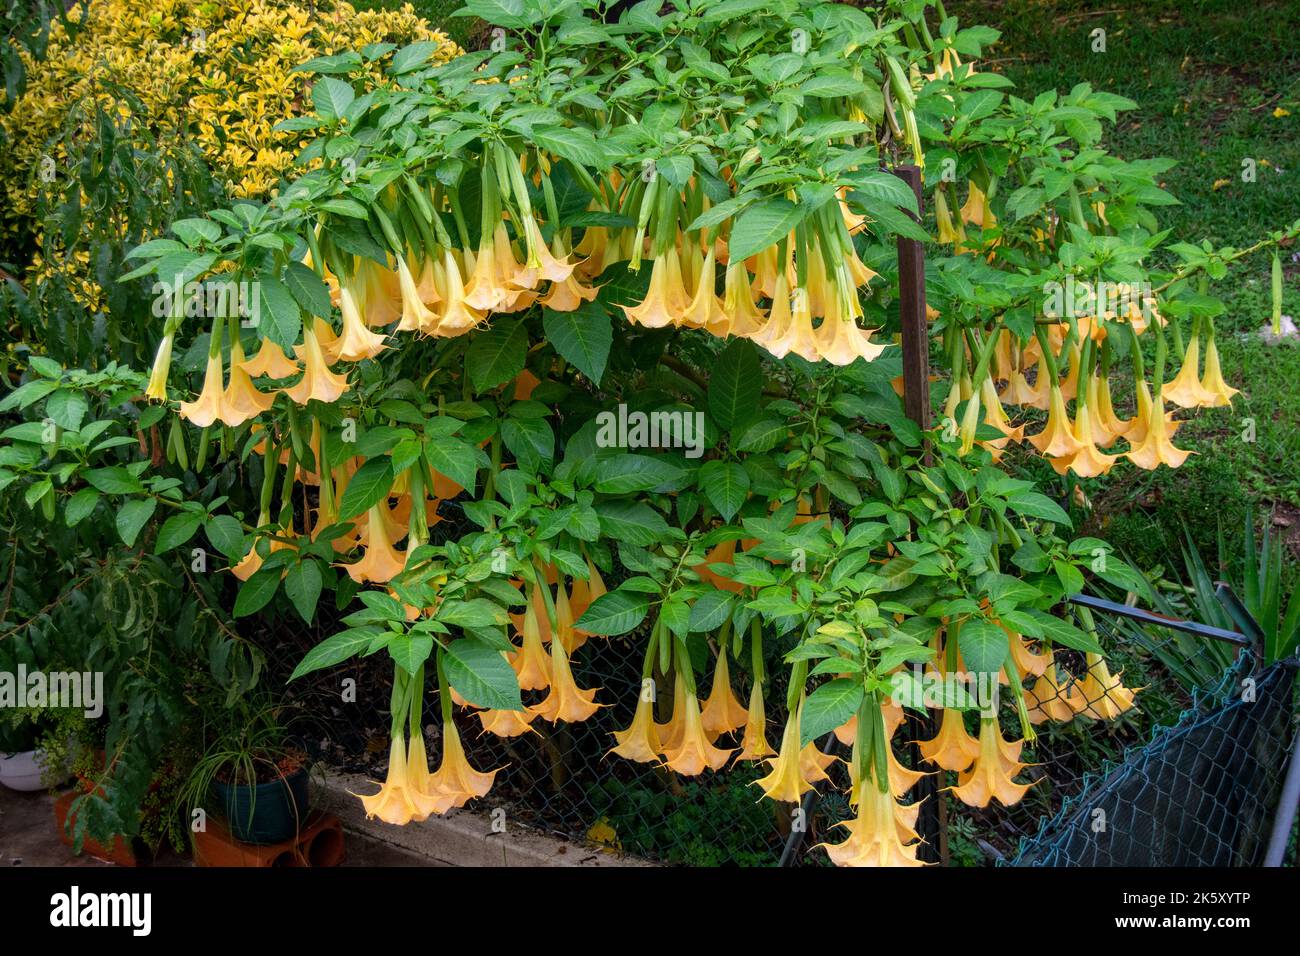 Brugmansia is a genus of seven species of flowering plants in the nightshade family Solanaceae. They are woody trees or shrubs, with pendulous flowers. Stock Photo